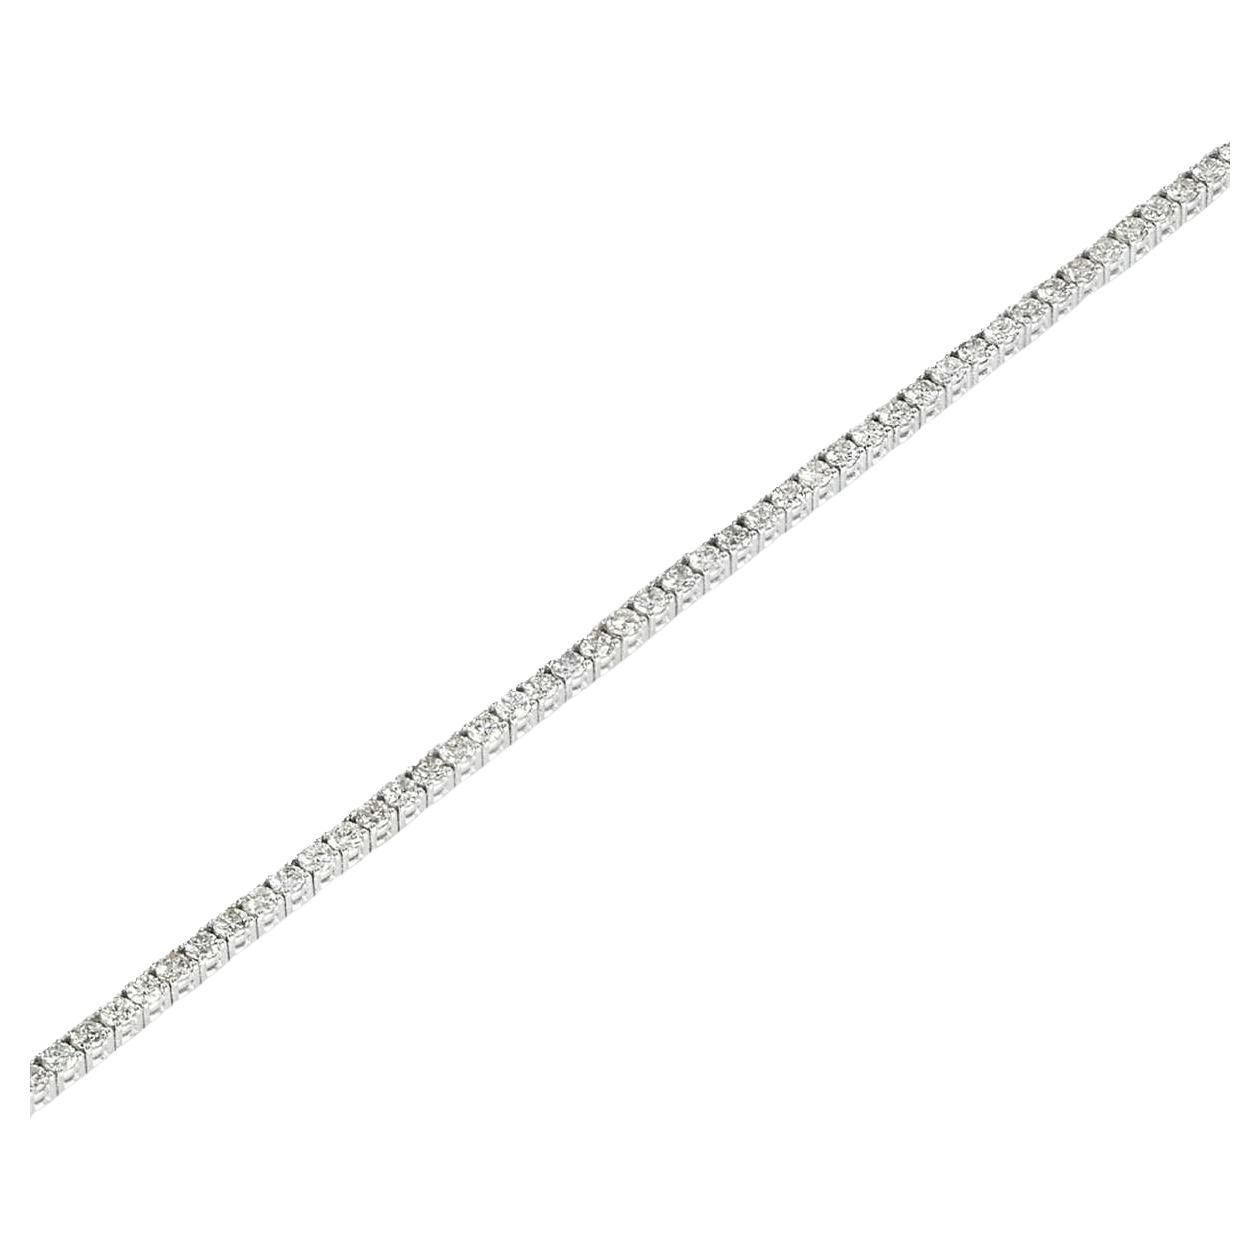 A stunning 18k white gold diamond tennis bracelet. The line bracelet features 94 round brilliant cut diamonds in a four prong setting with a total weight of 2.03ct, G-H colour and SI clarity. The bracelet measures 7 inches in length and 2mm in